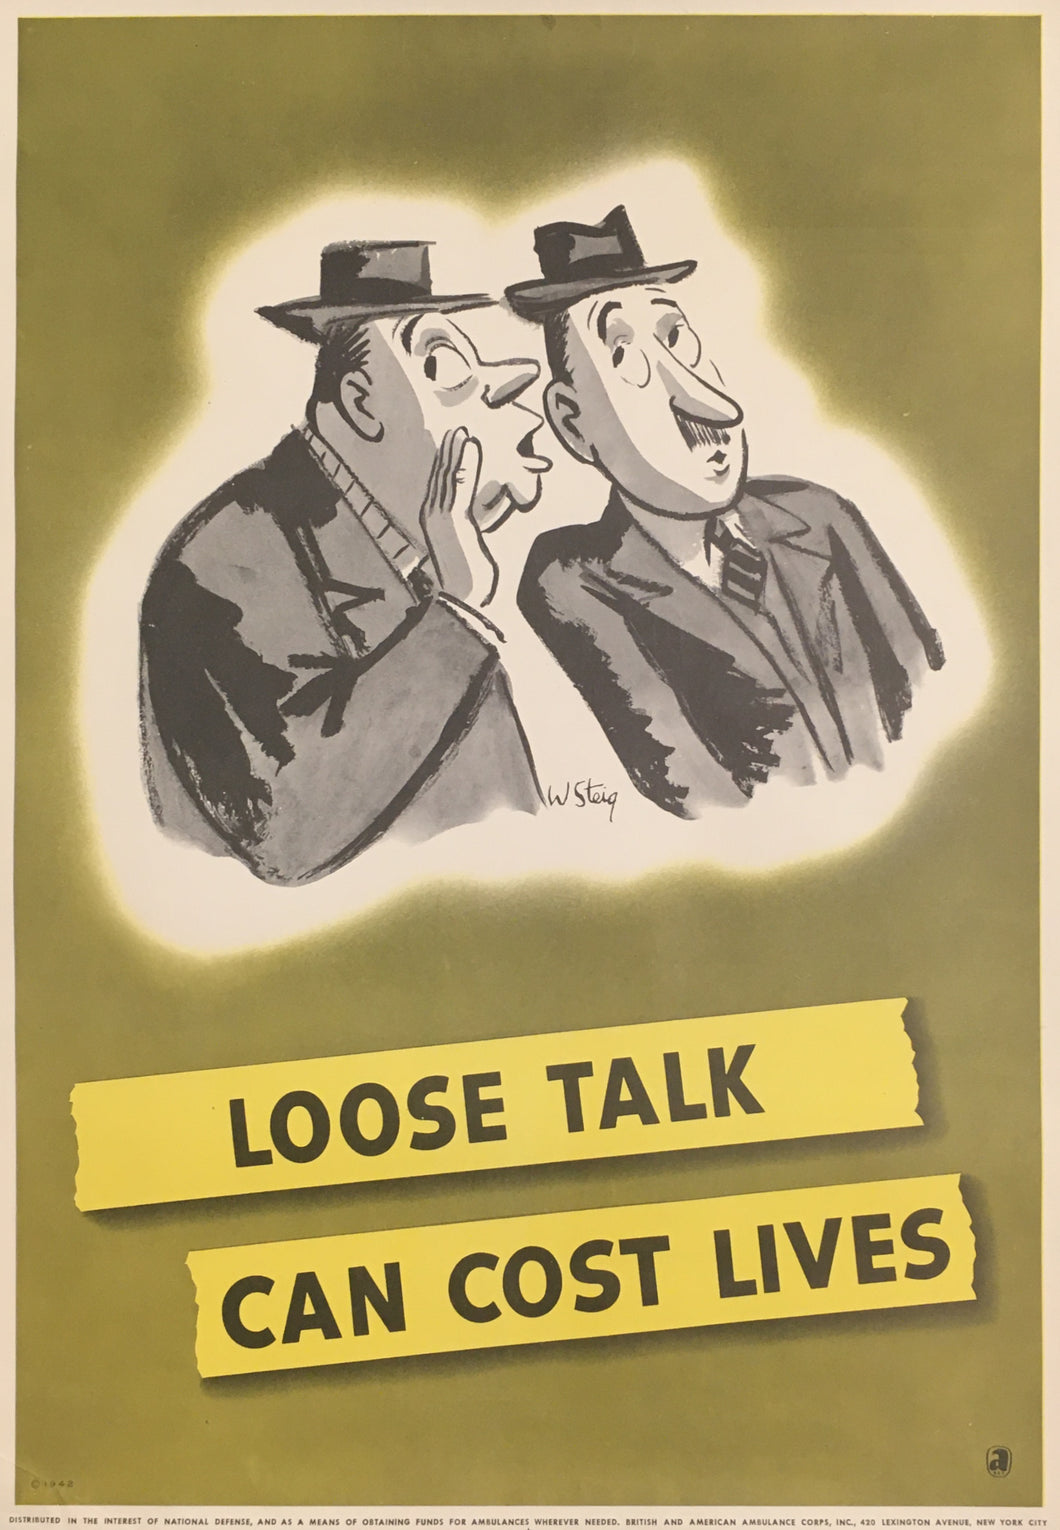 Steig, William “Loose Talk Can Cost Lives”